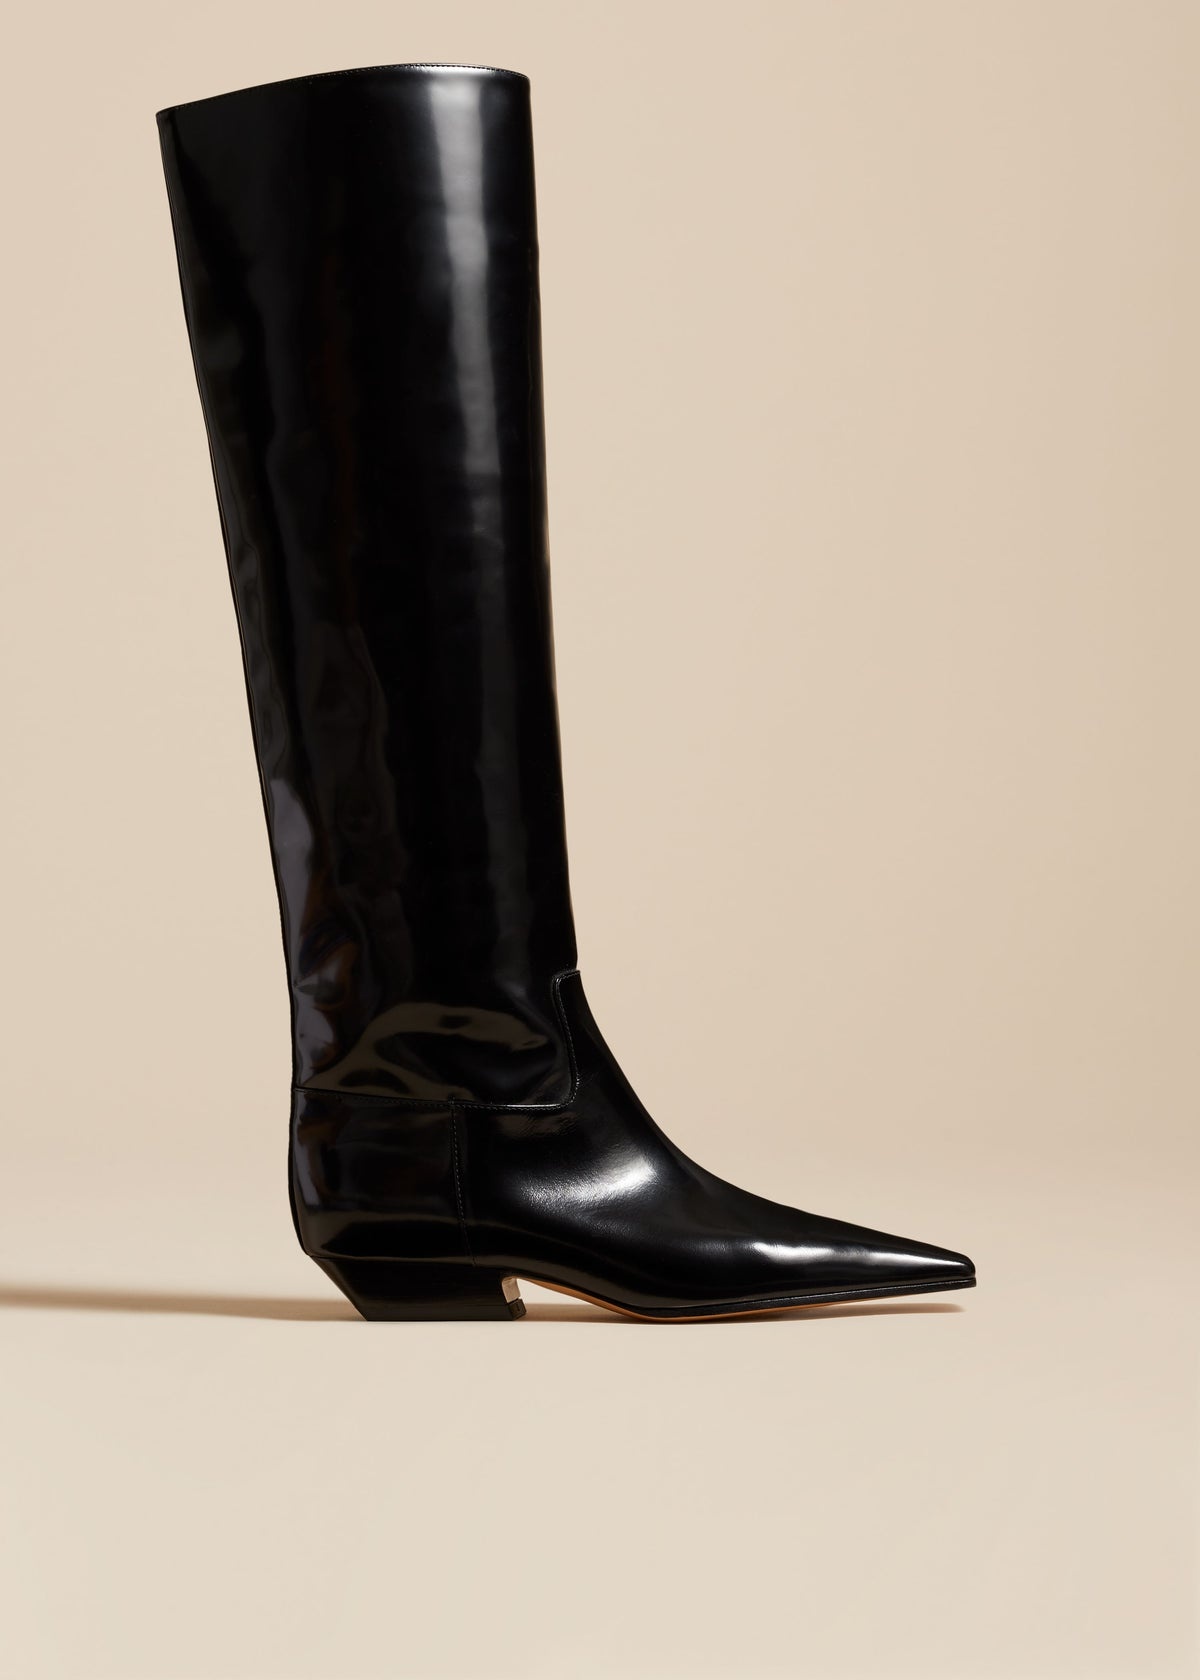 The Marfa Knee-High Boot in Black Brushed Leather - 1